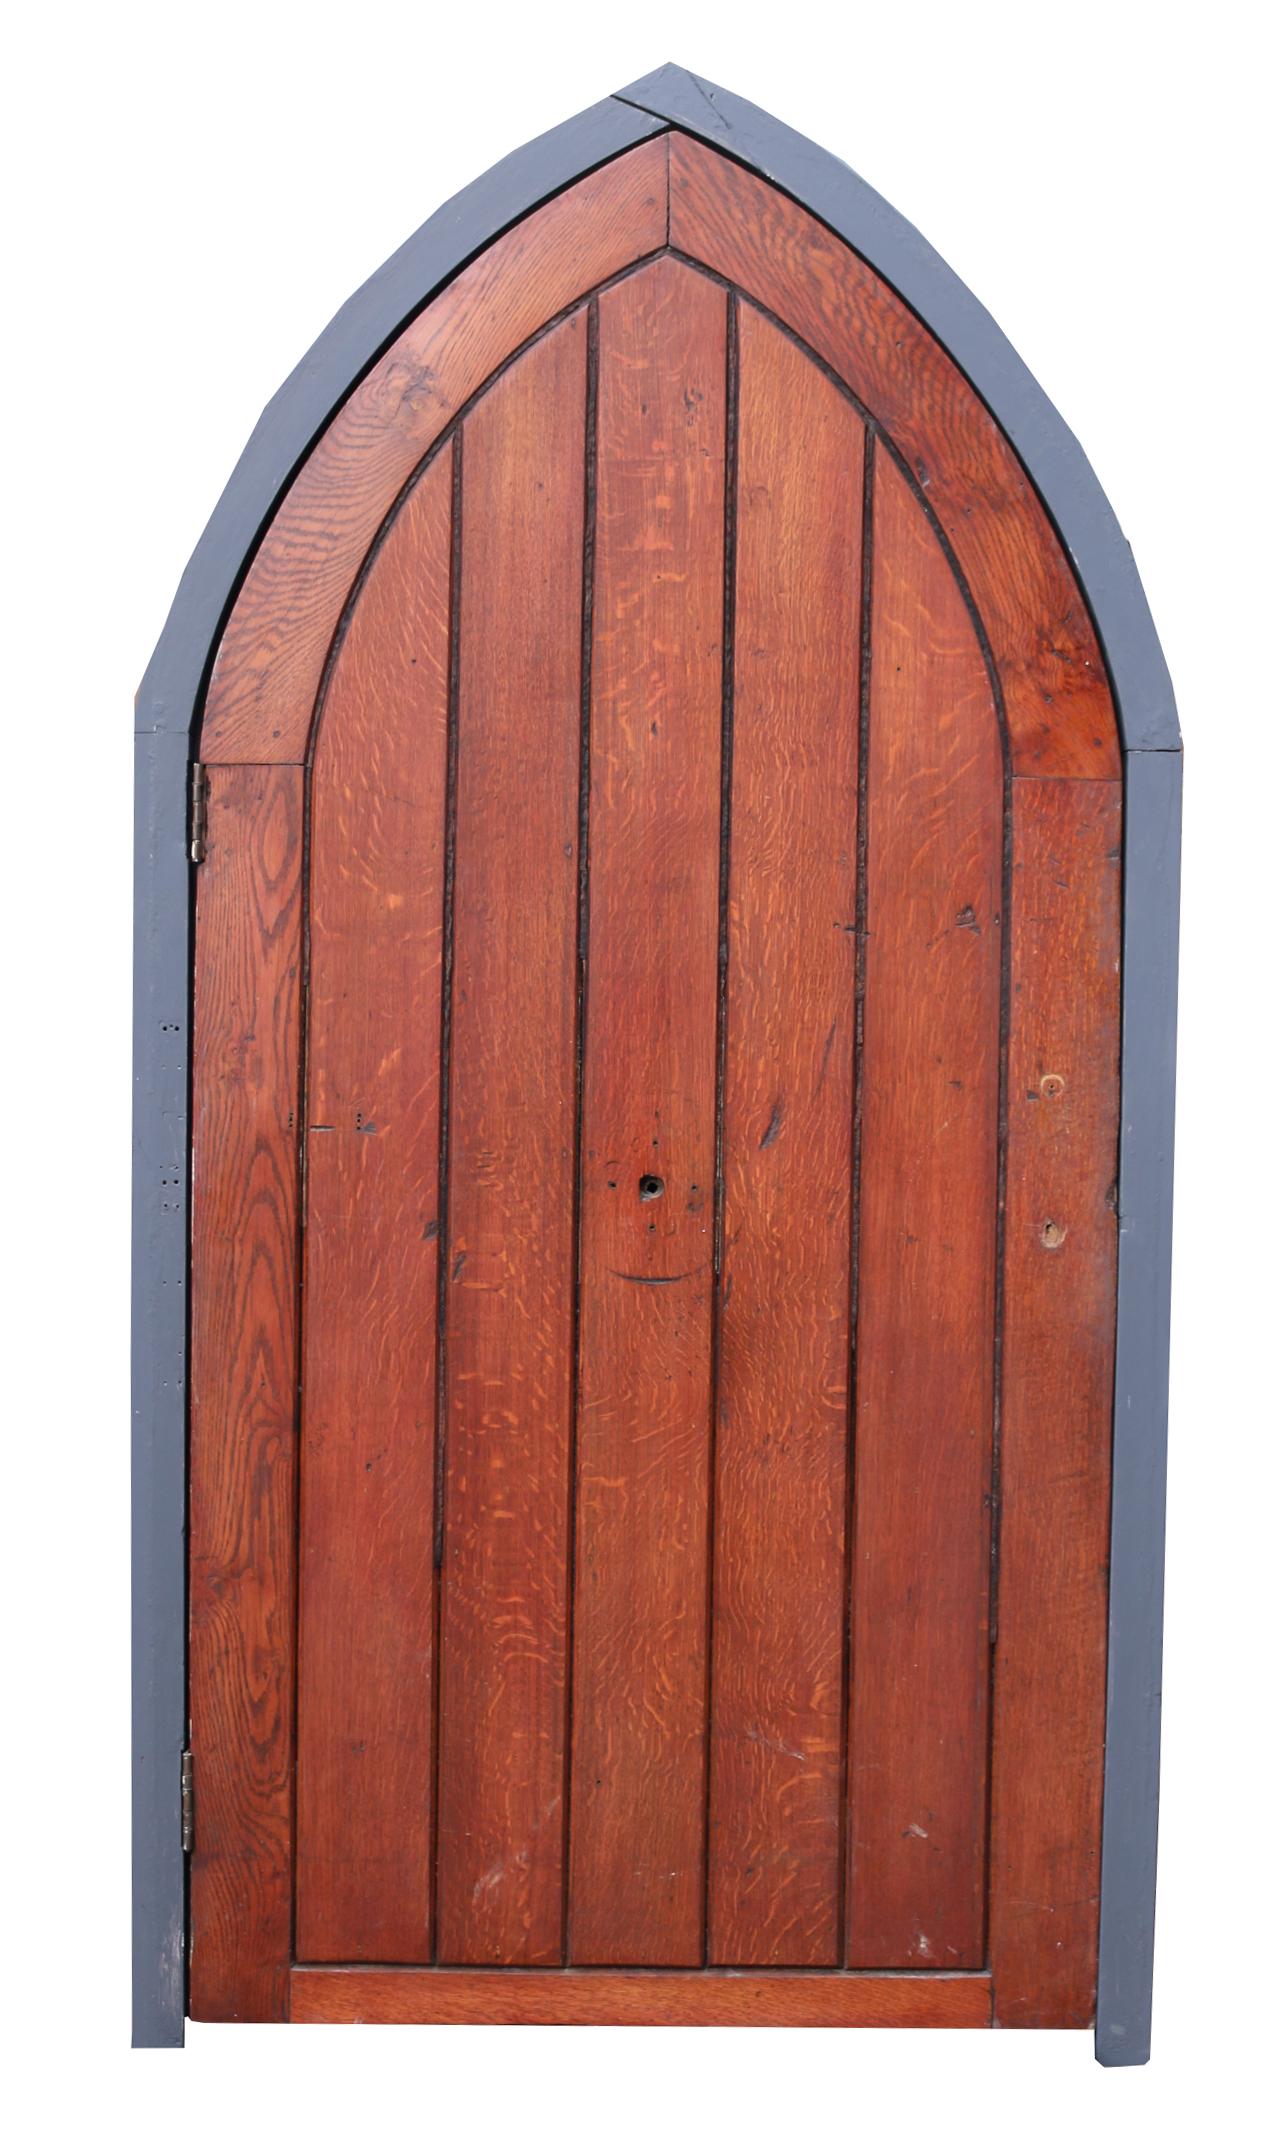 About

An antique arched oak door with a painted pine door frame.

Condition report

In good condition for its age and use, the frame has been painted in grey paint. There are some old marks left from previous hardware. The frame is in two